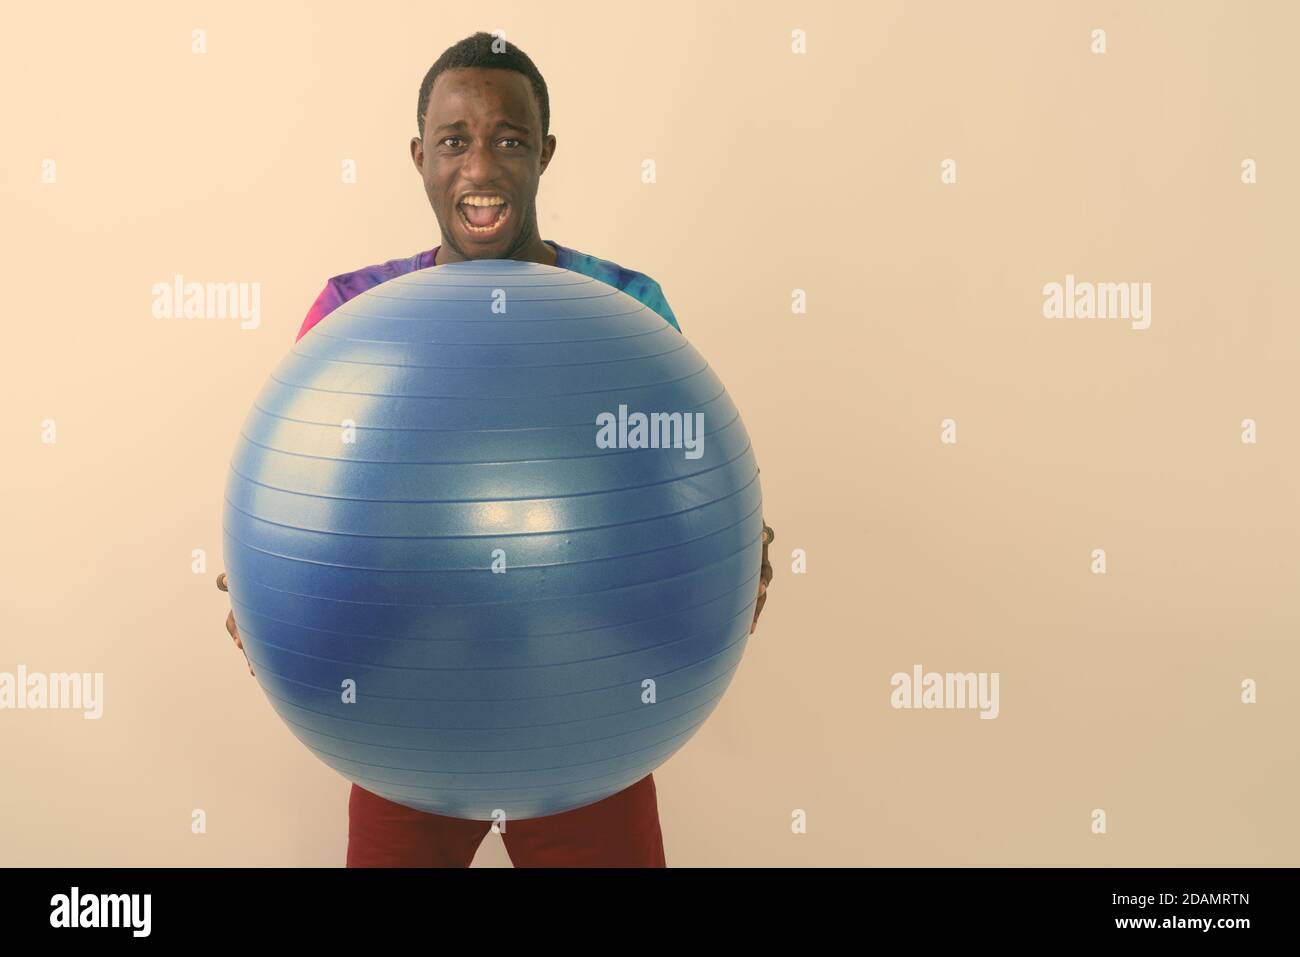 Studio shot of young black African man holding big exercise ball ready for gym against white background Stock Photo